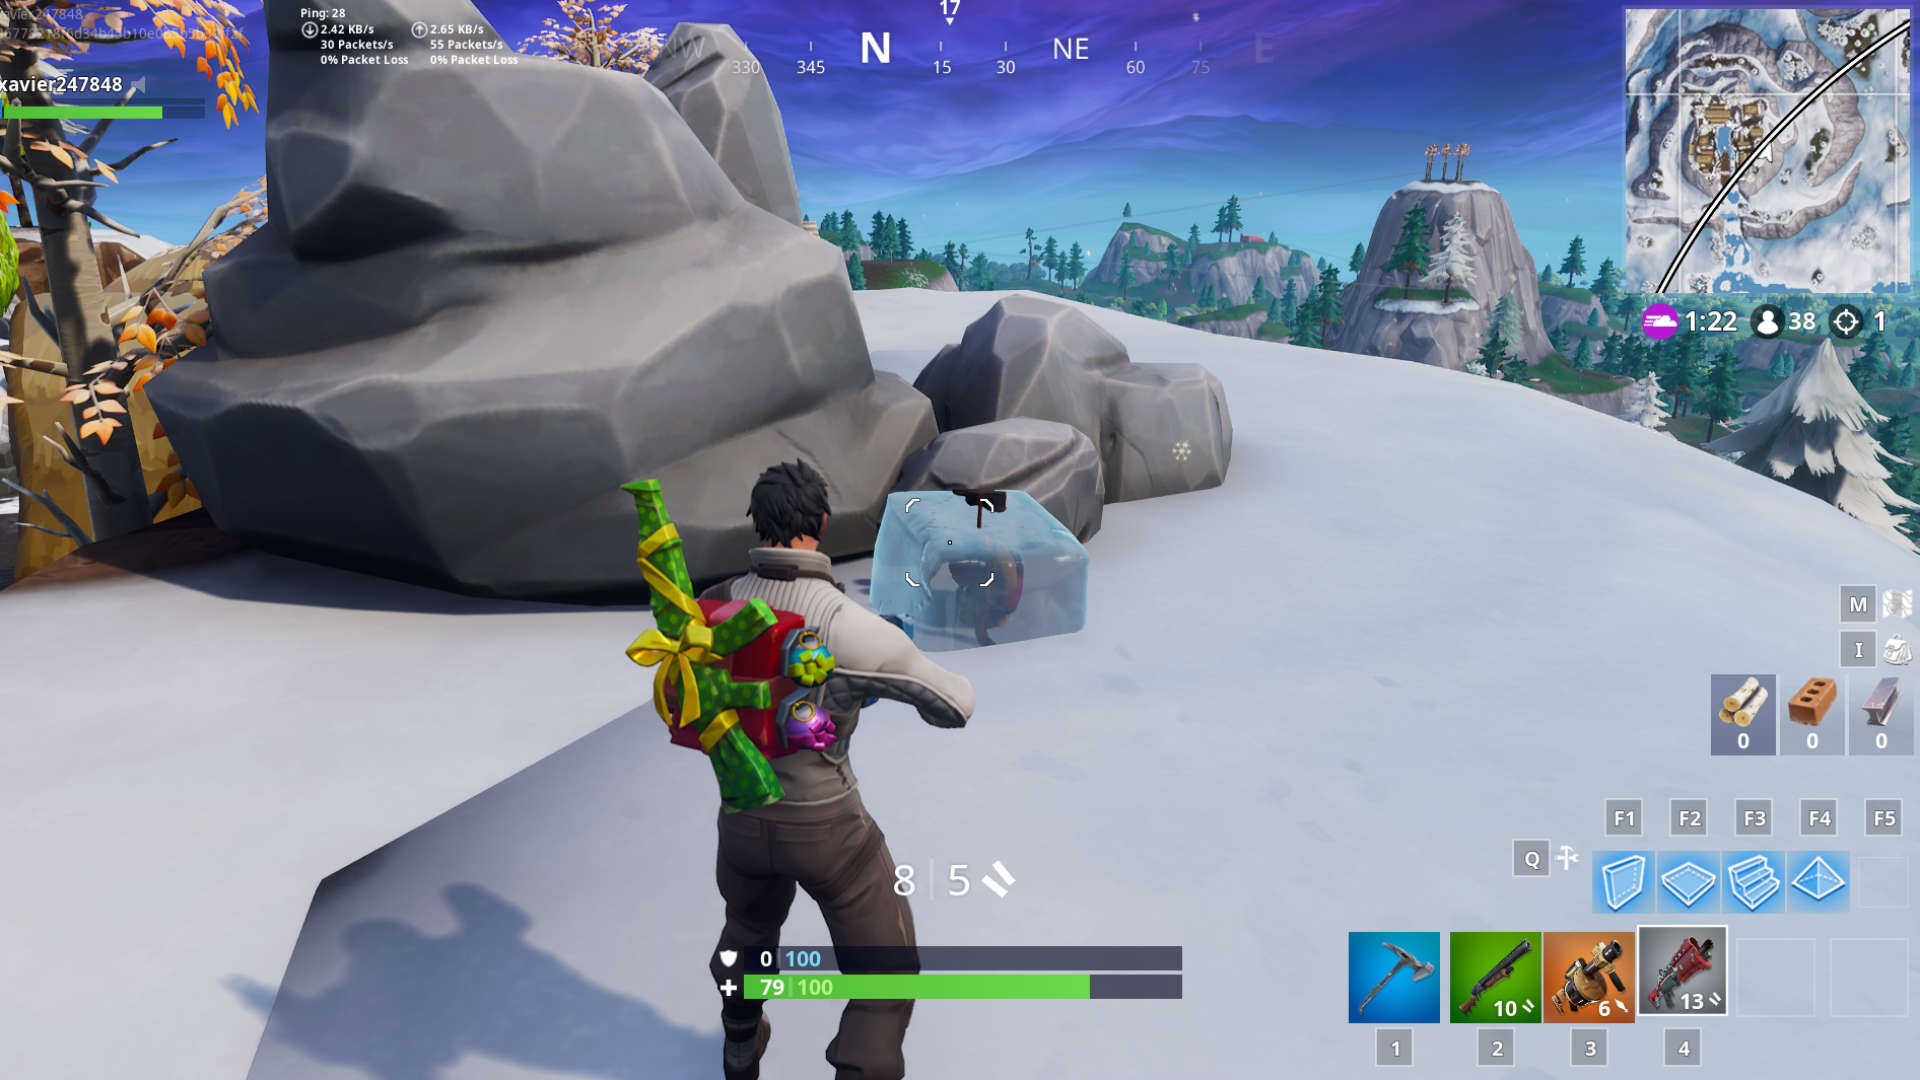 Fortnite Chilly Gnomes Locations Where To Search Chilly Gnomes - fortnite chilly gnomes viking ship